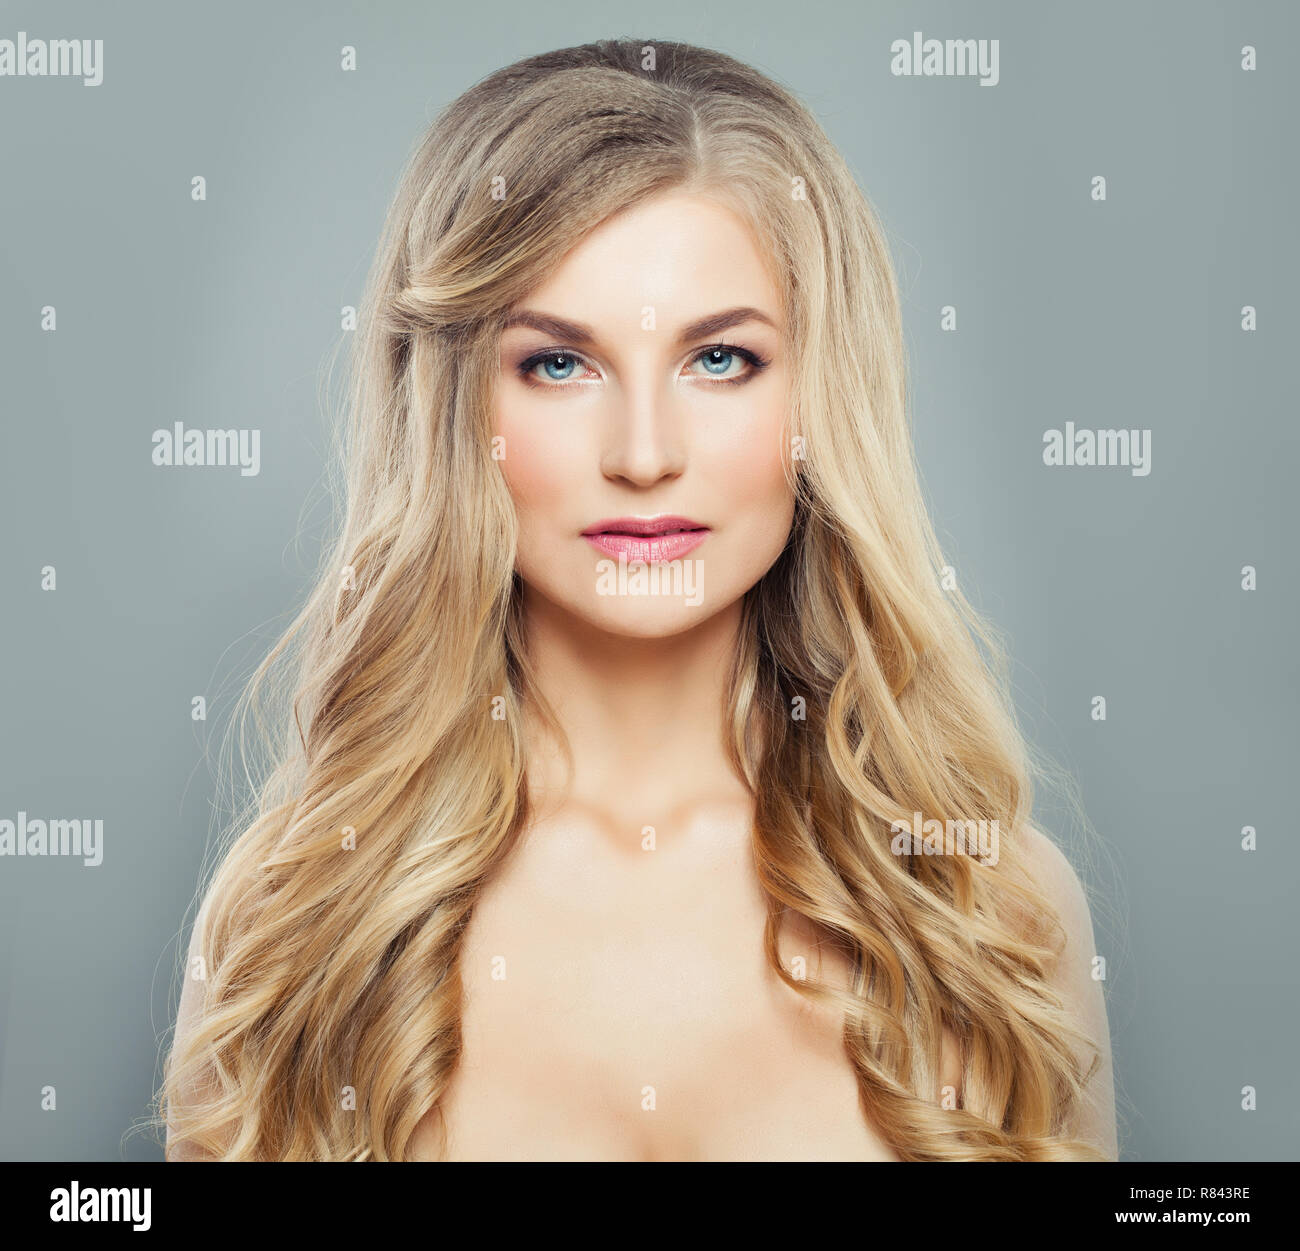 Mature Blonde Hair Salon High Resolution Stock Photography And Images Alamy